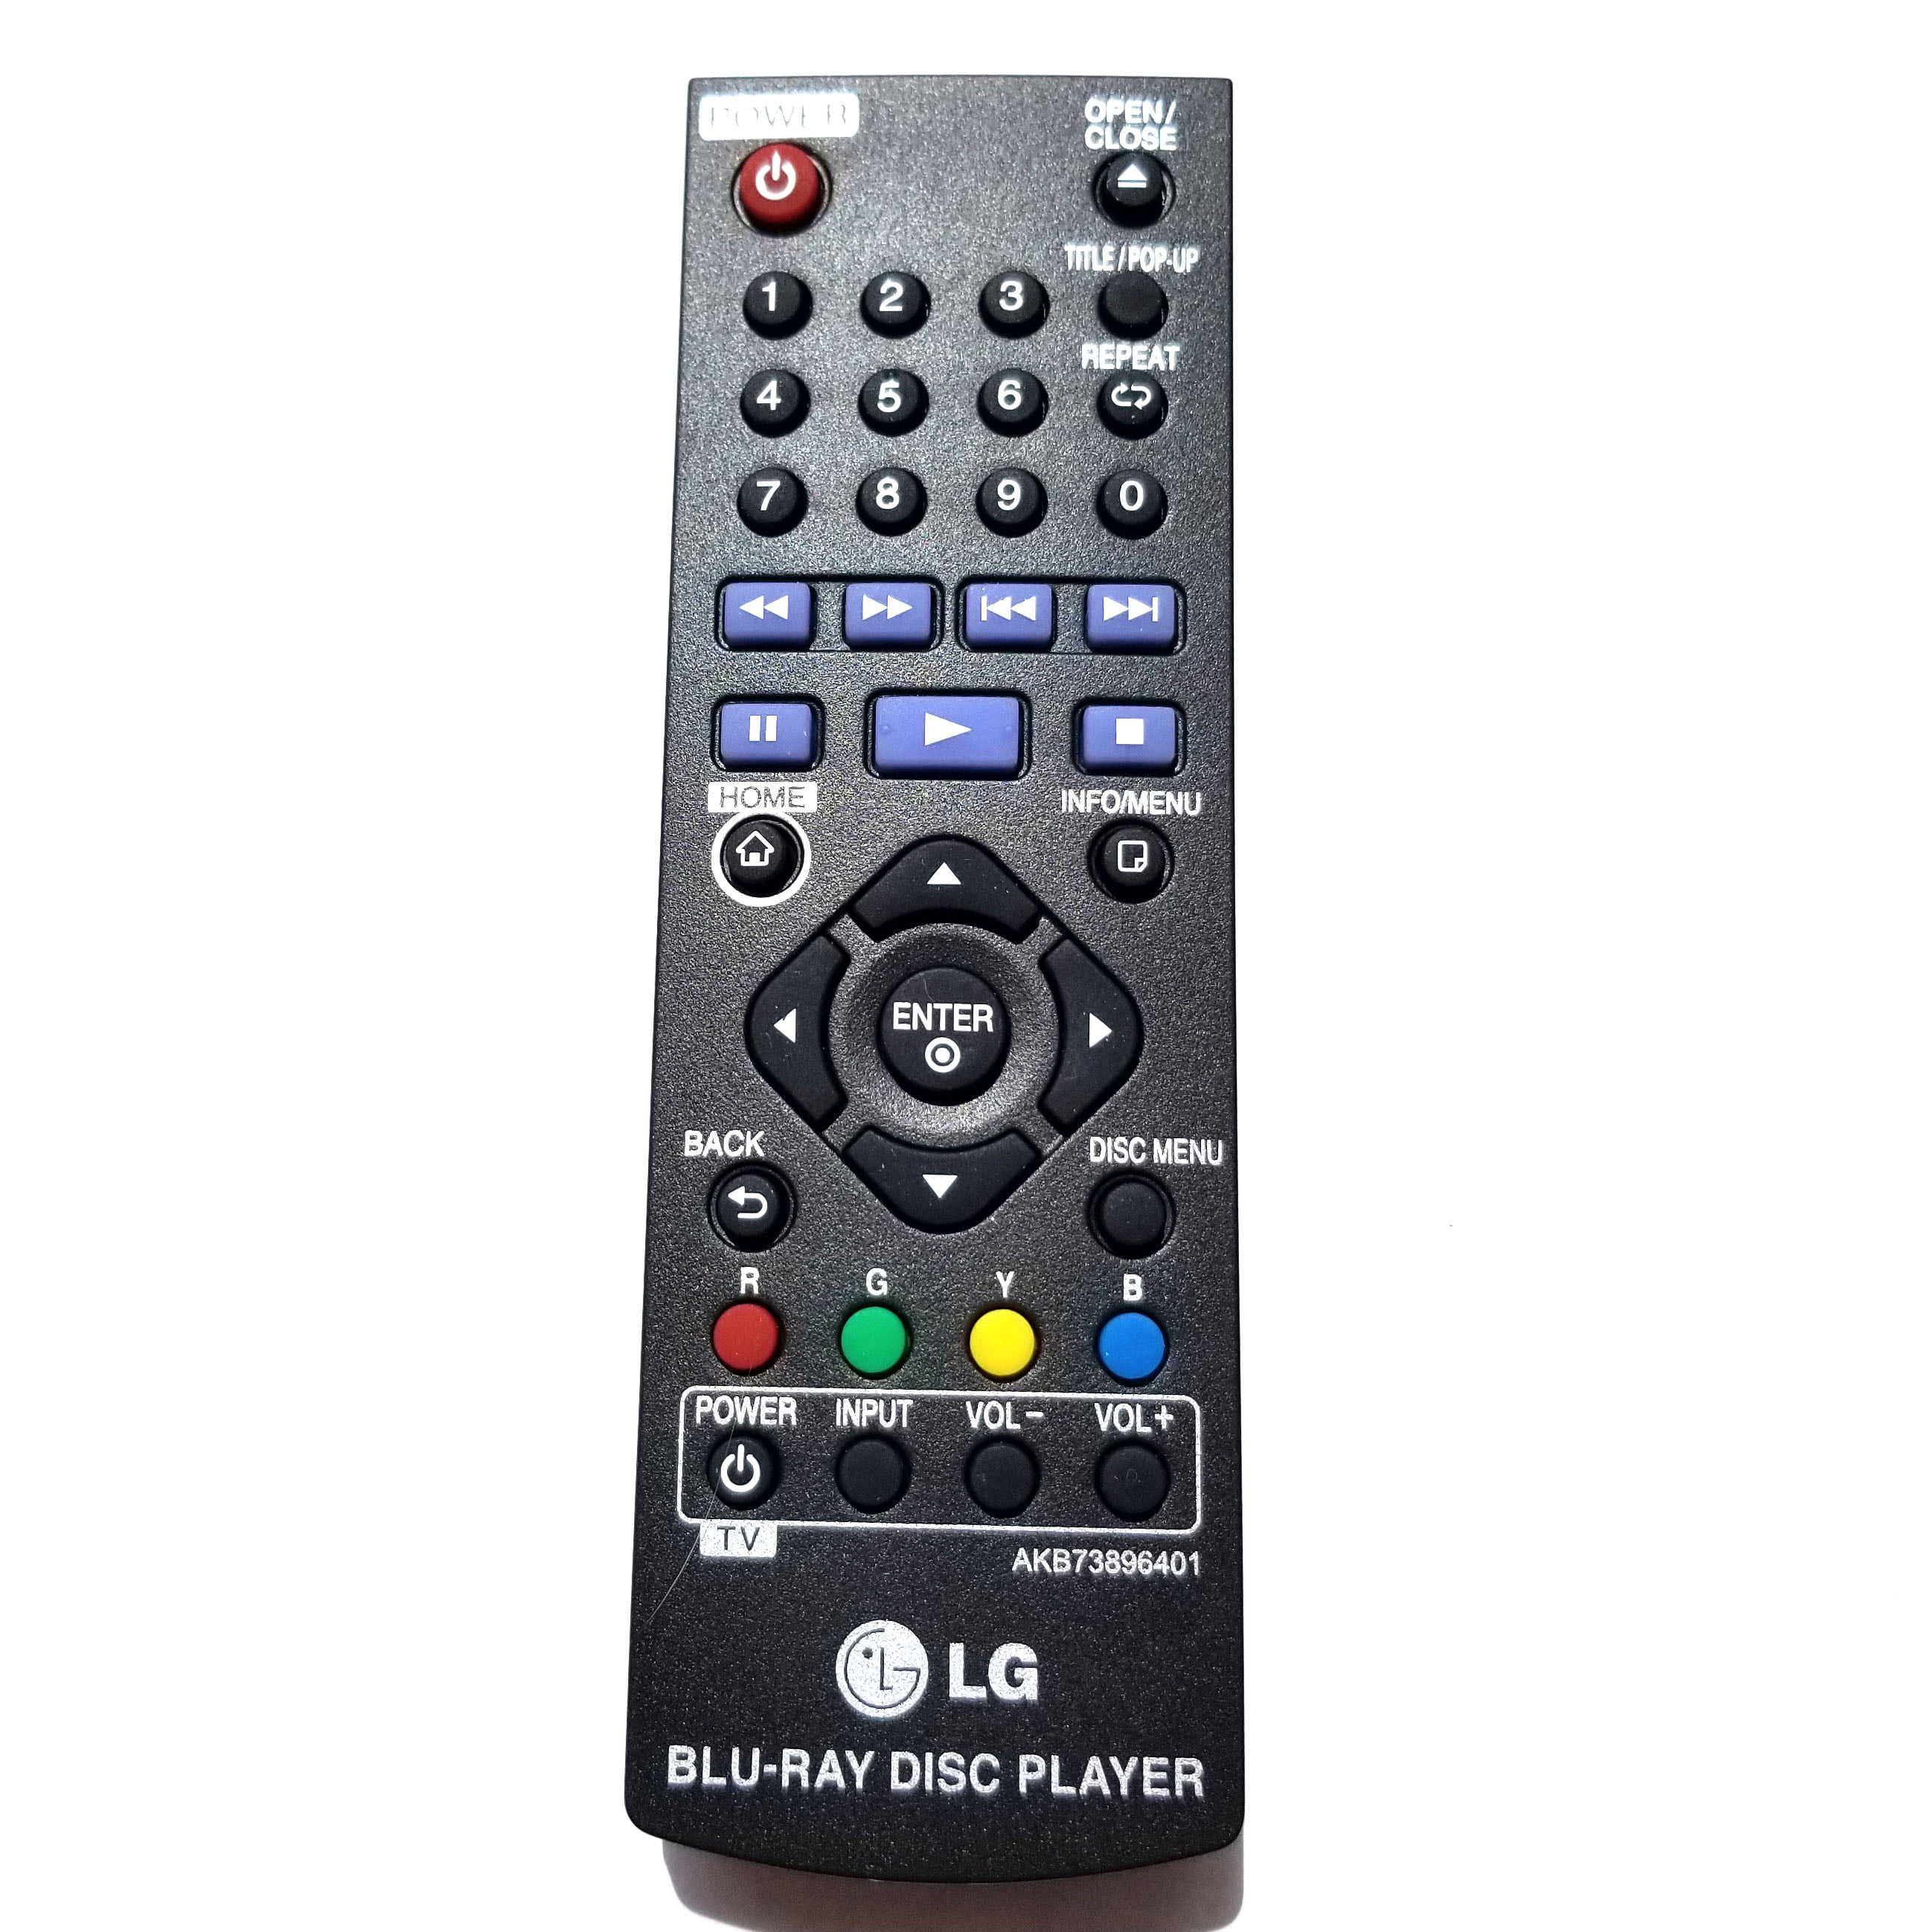 Replacement Remote for LG AKB73896401 DVD/Blue-Ray Disc Player Remote